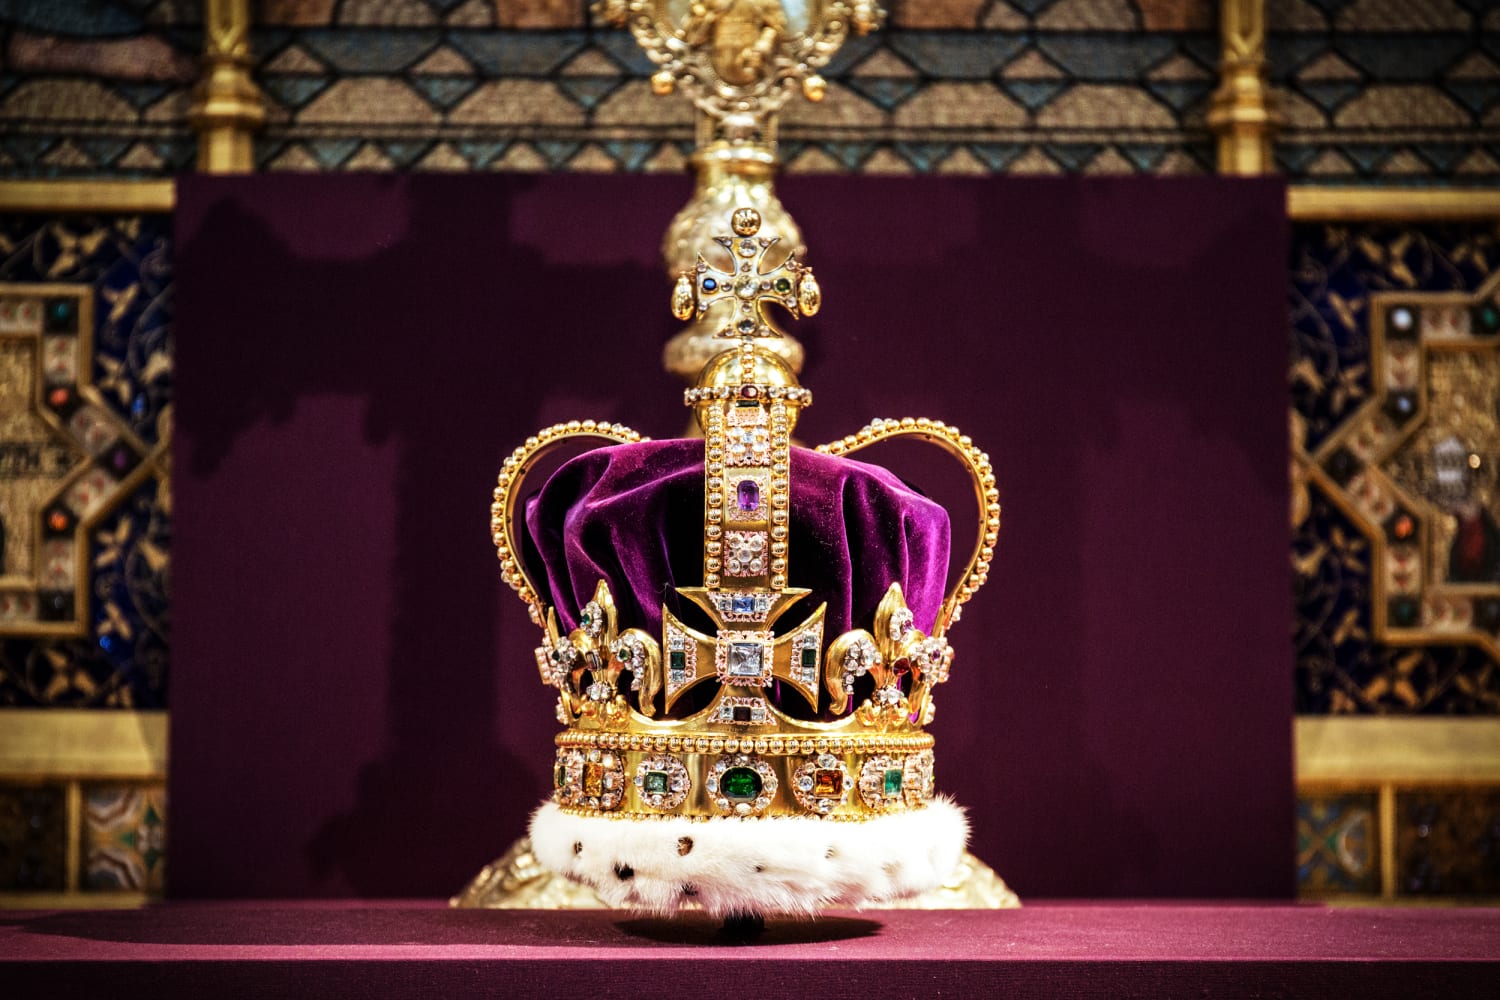 Comparing the coronation of King Charles and Queen Elizabeth - The